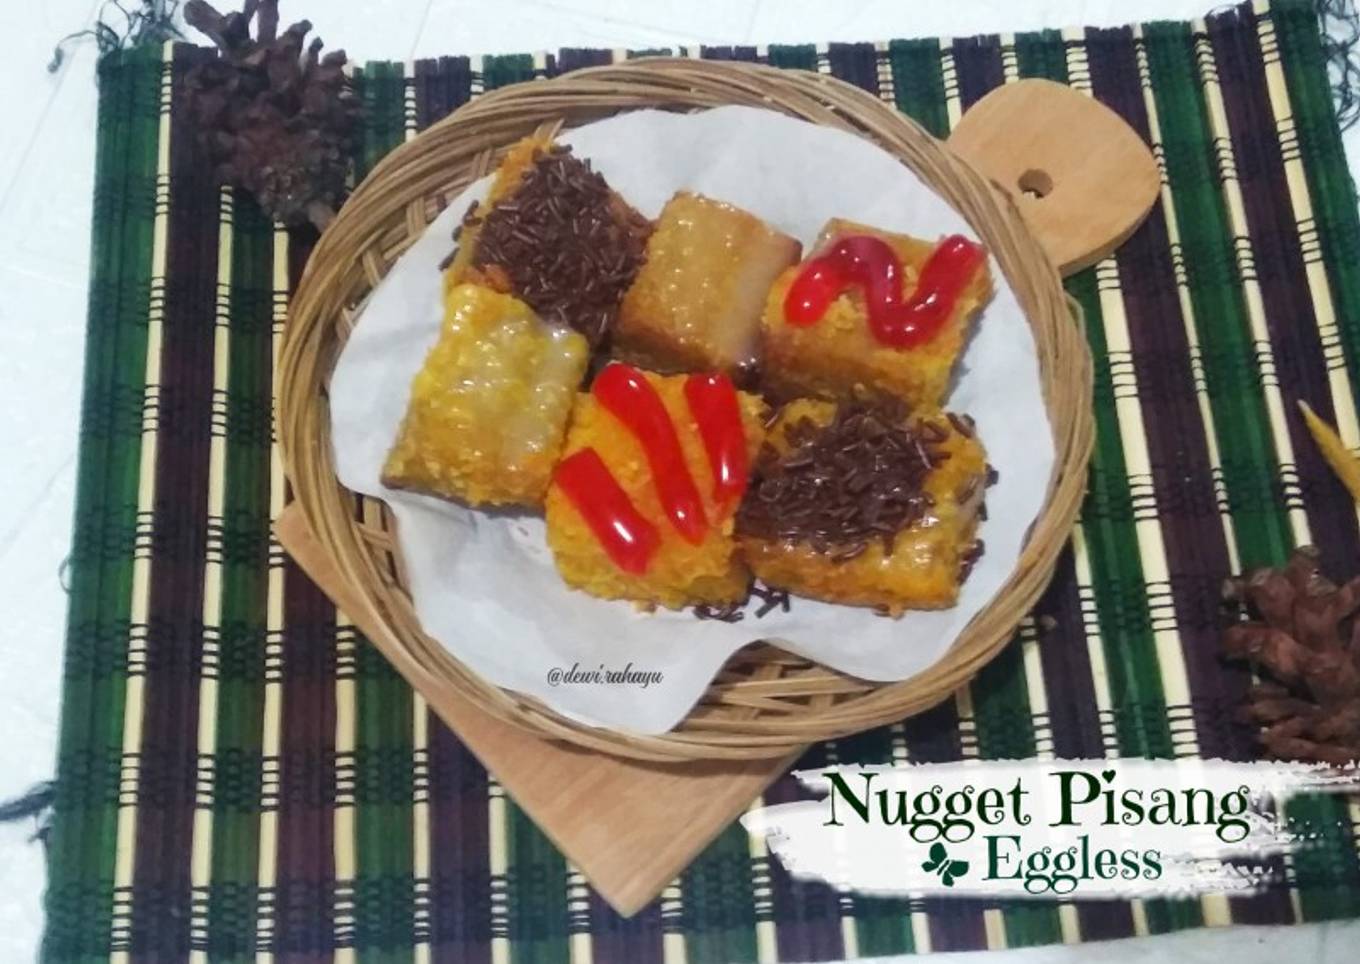 Nugget Pisang (Eggless)